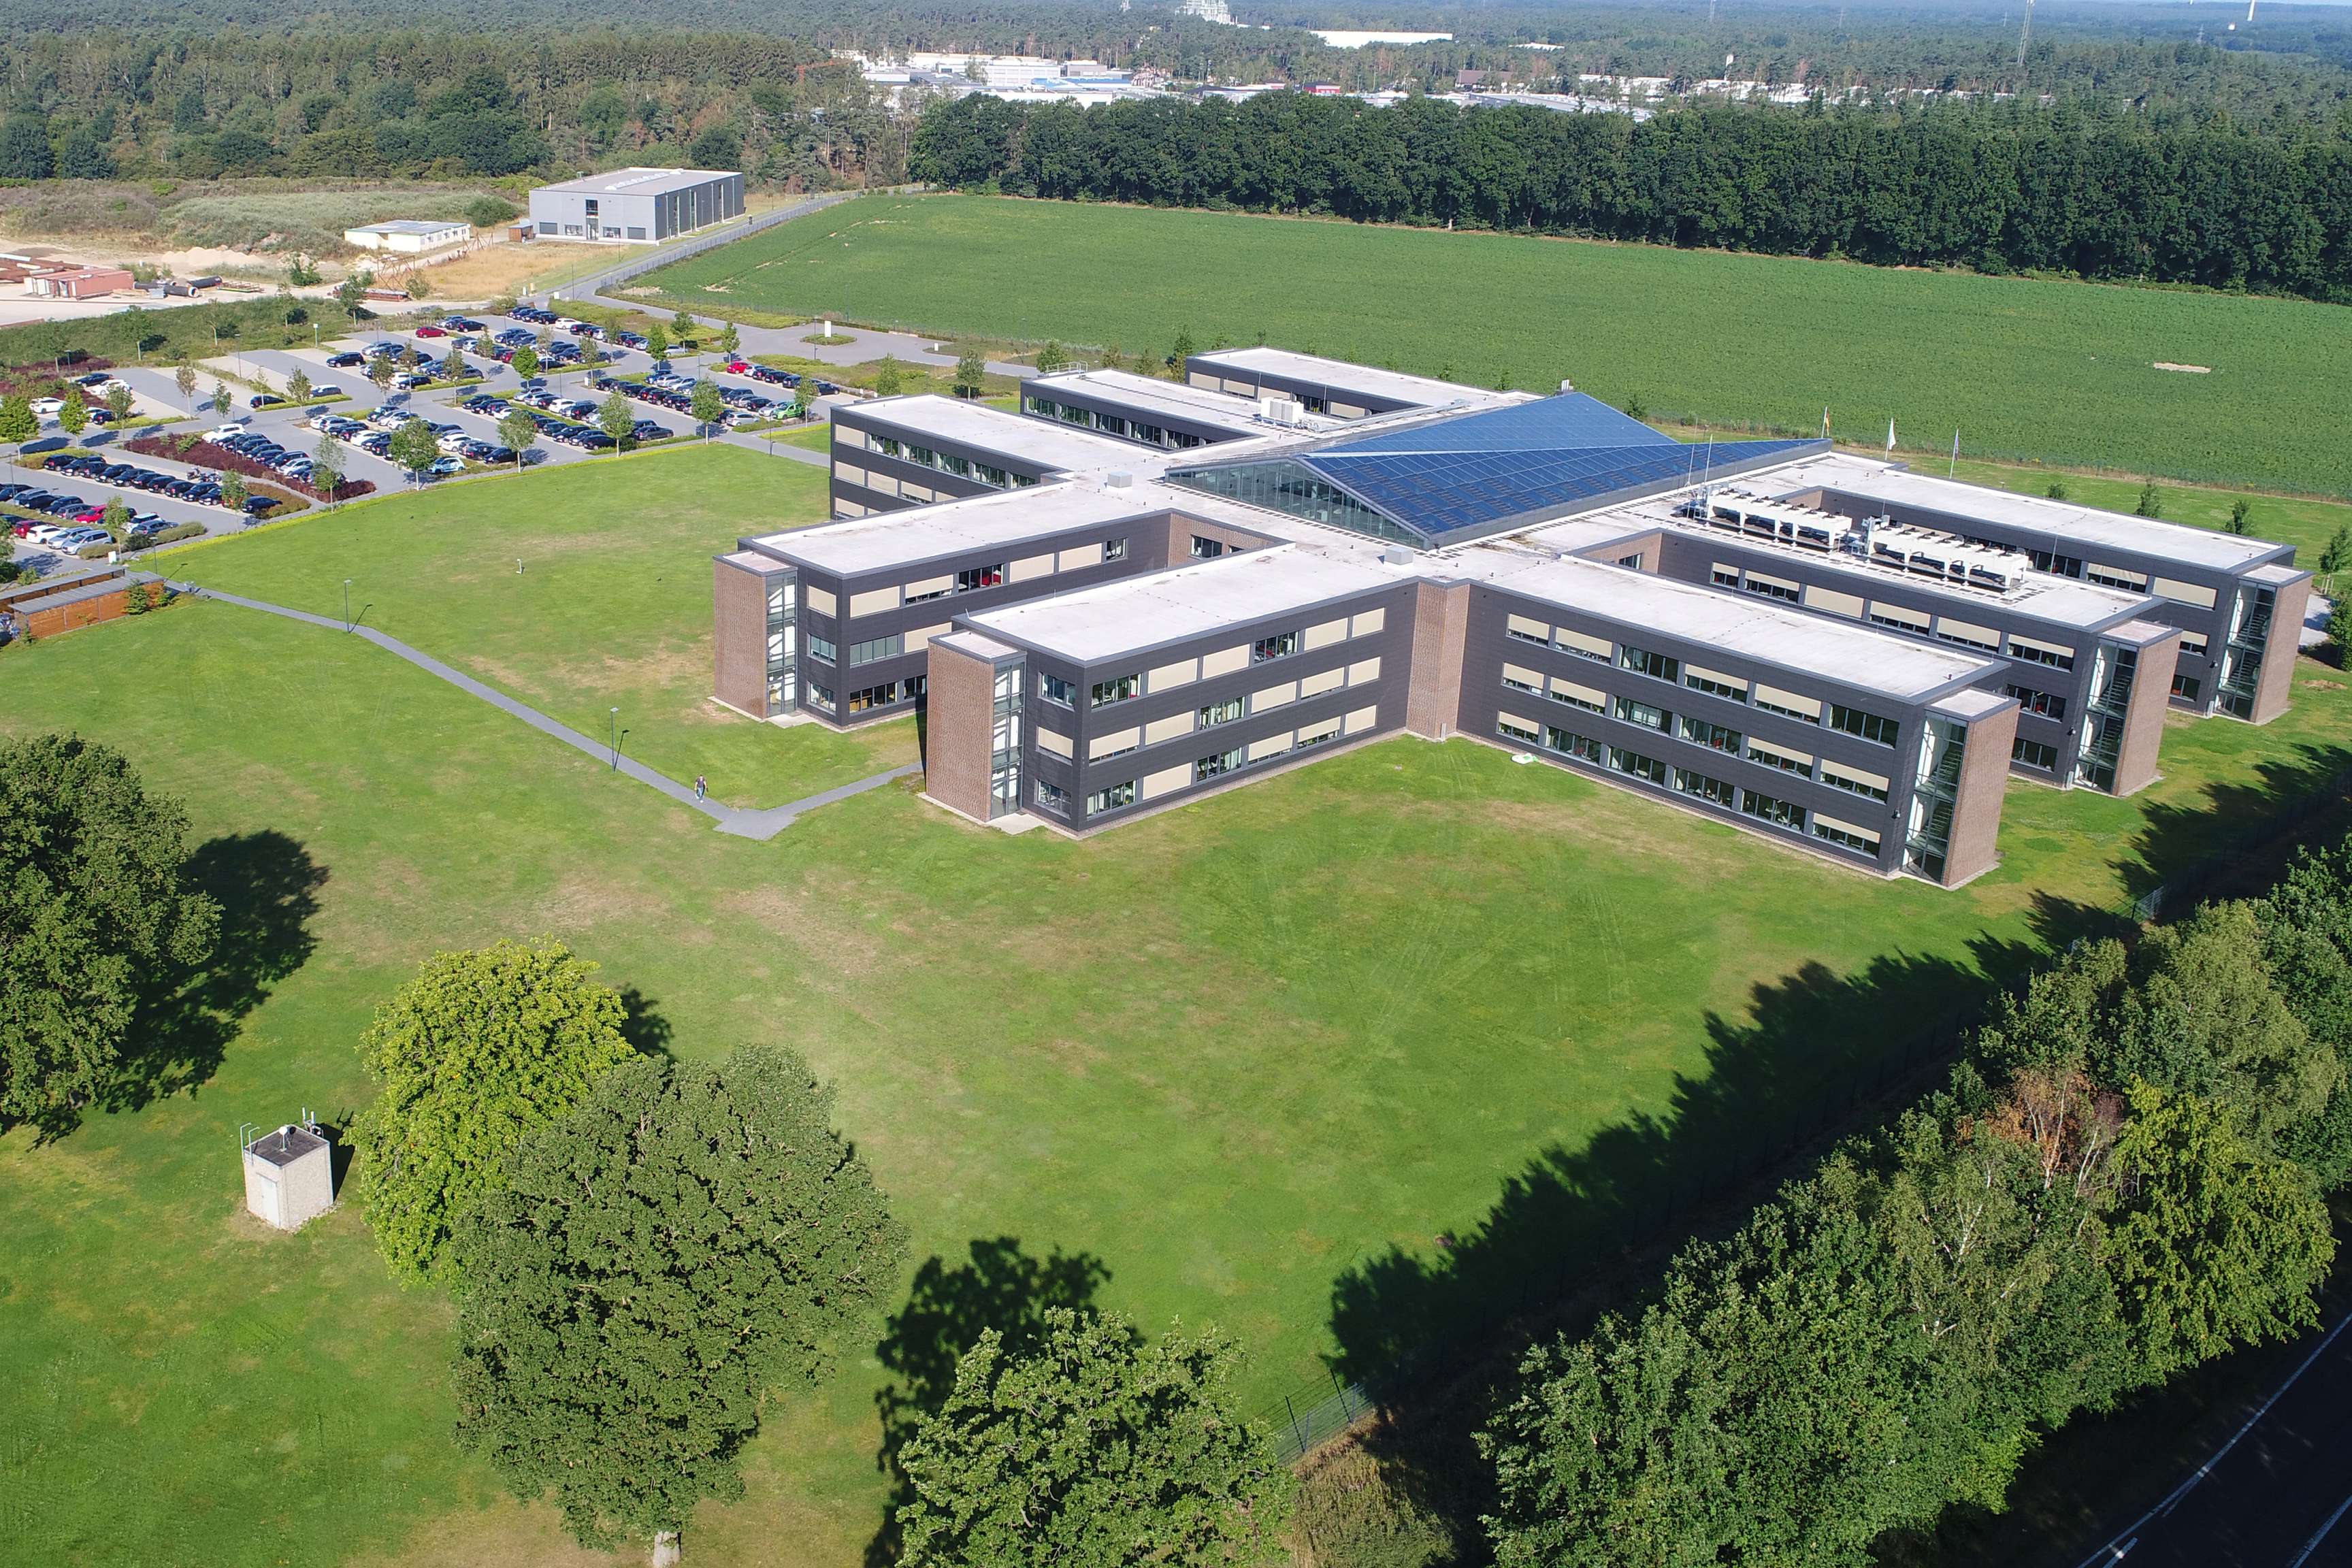 Aerial view of the building and parking lot from the site in Lingen.